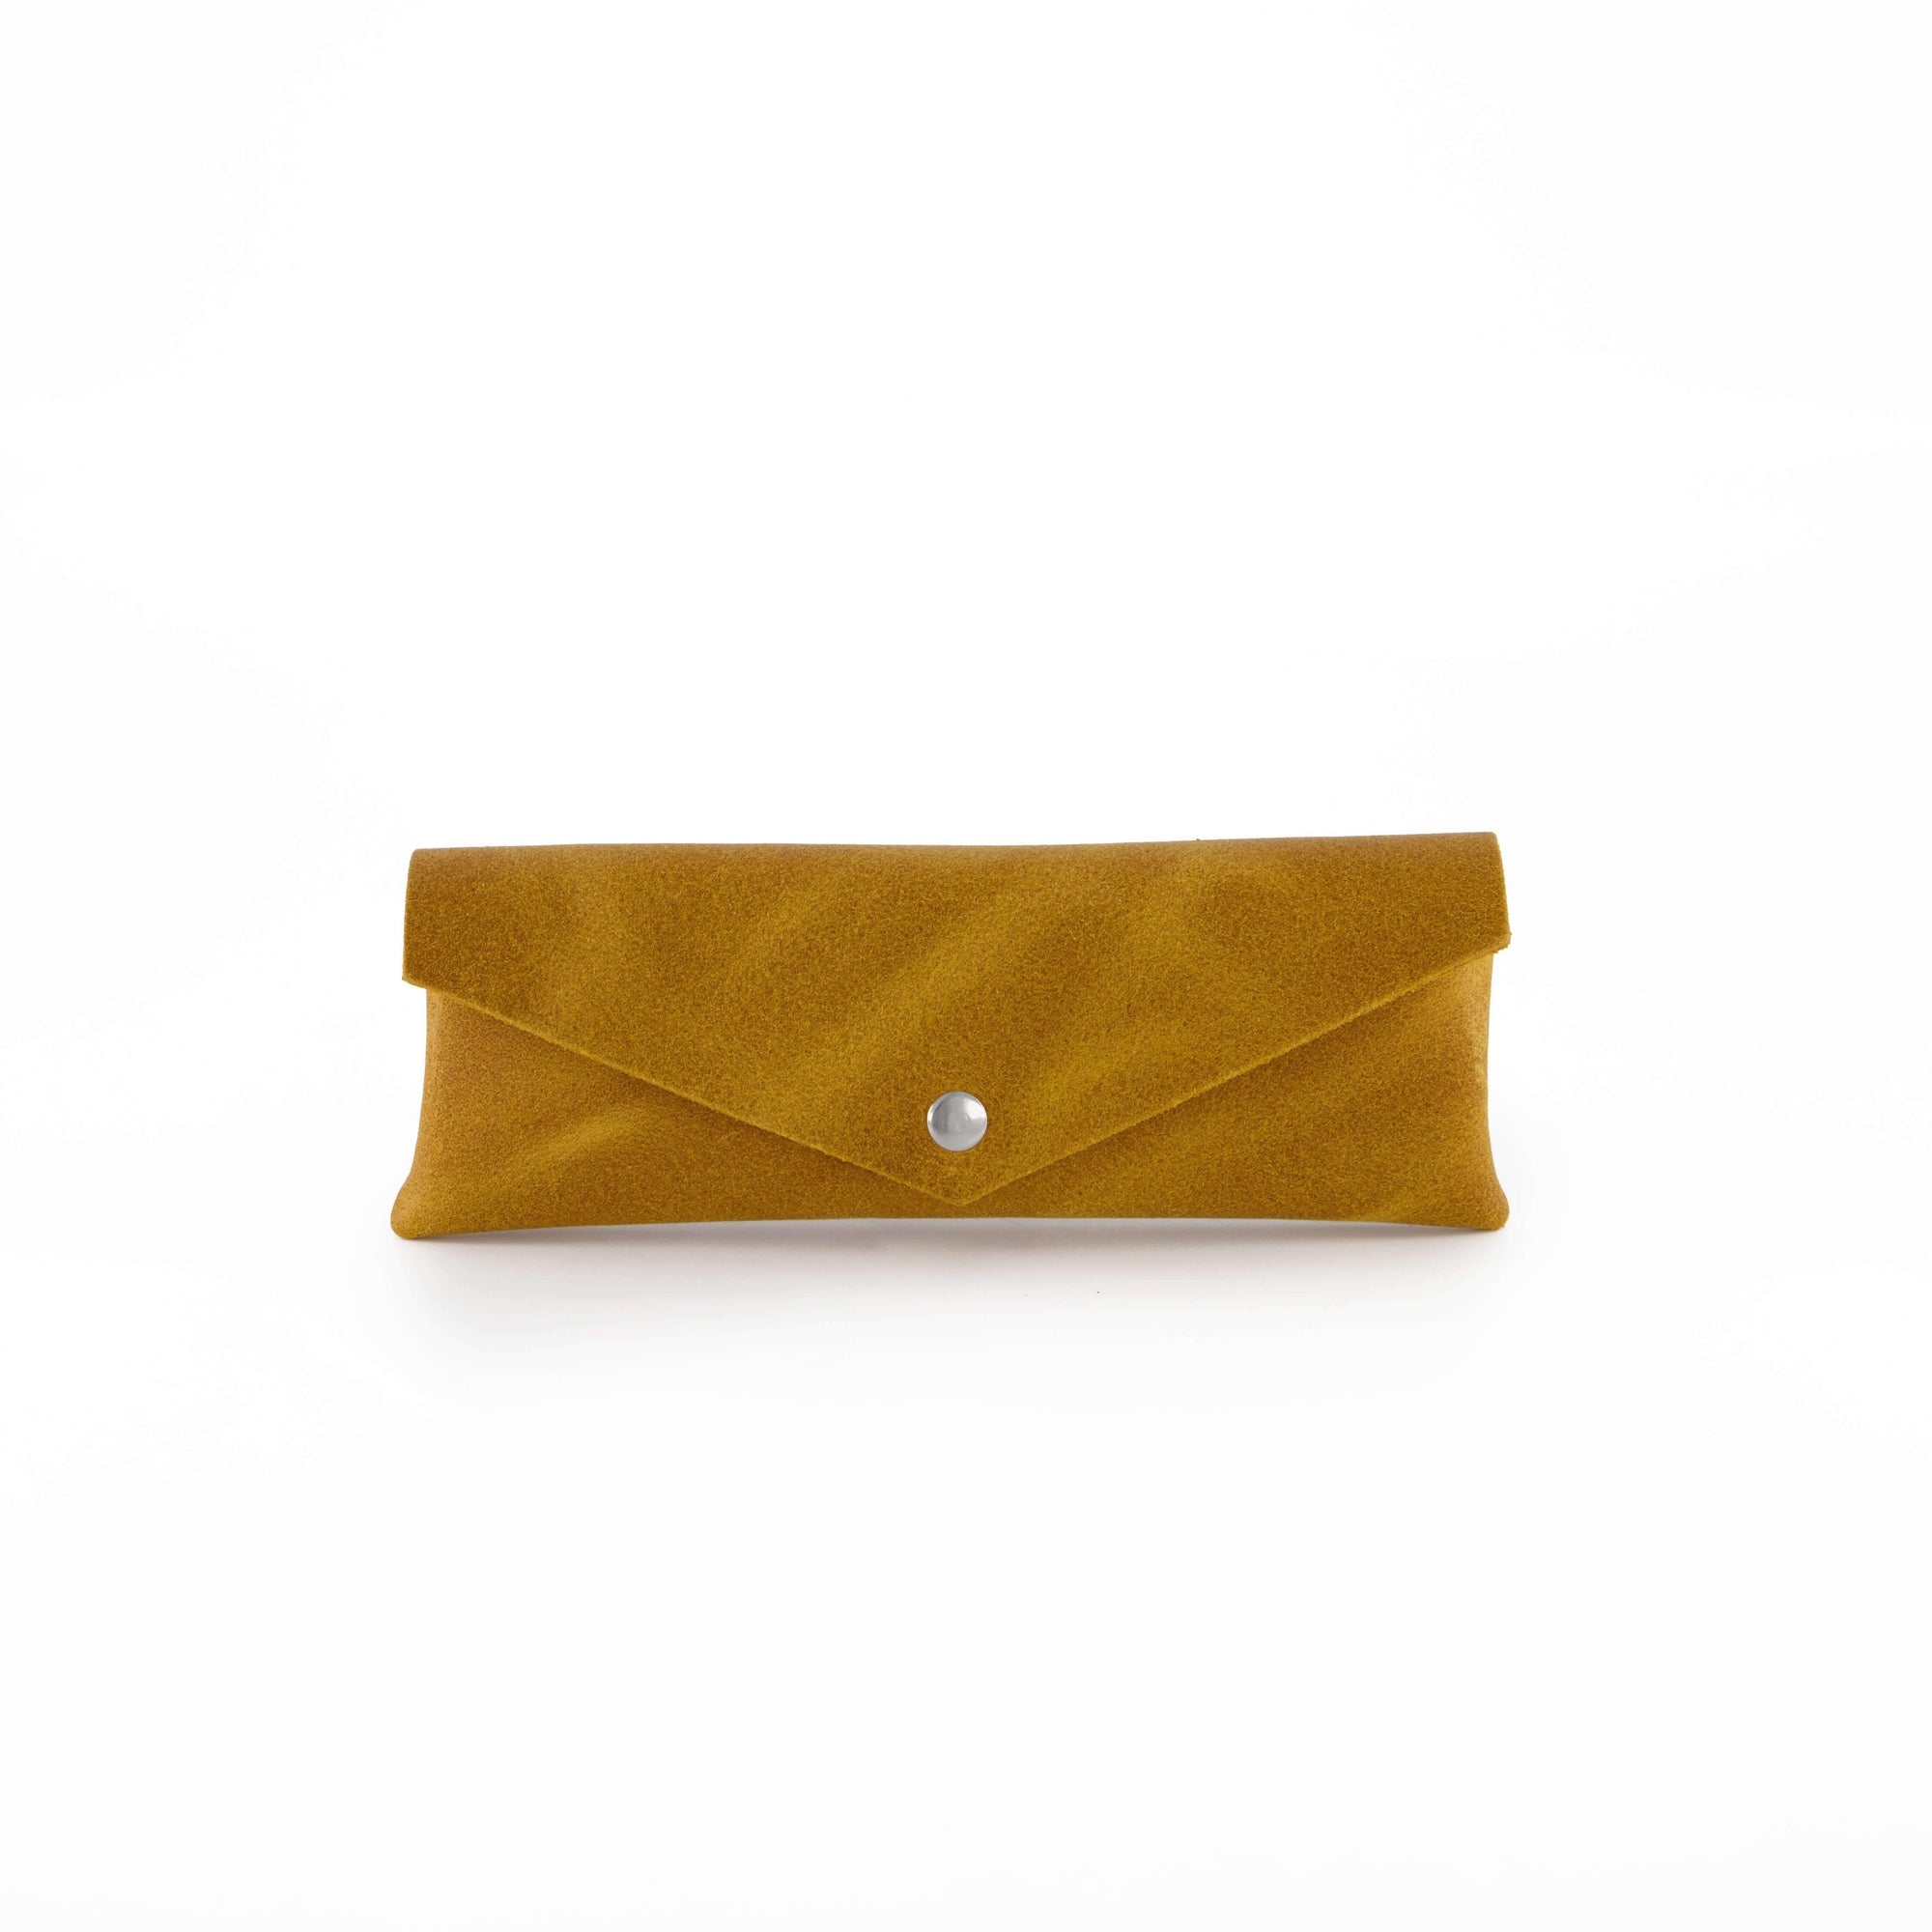 leather sunglasses case, leather pouch, leather envelope pouch, small gift, accessories, yellow leather case, pencils case, handmade leather, ||Mustard||